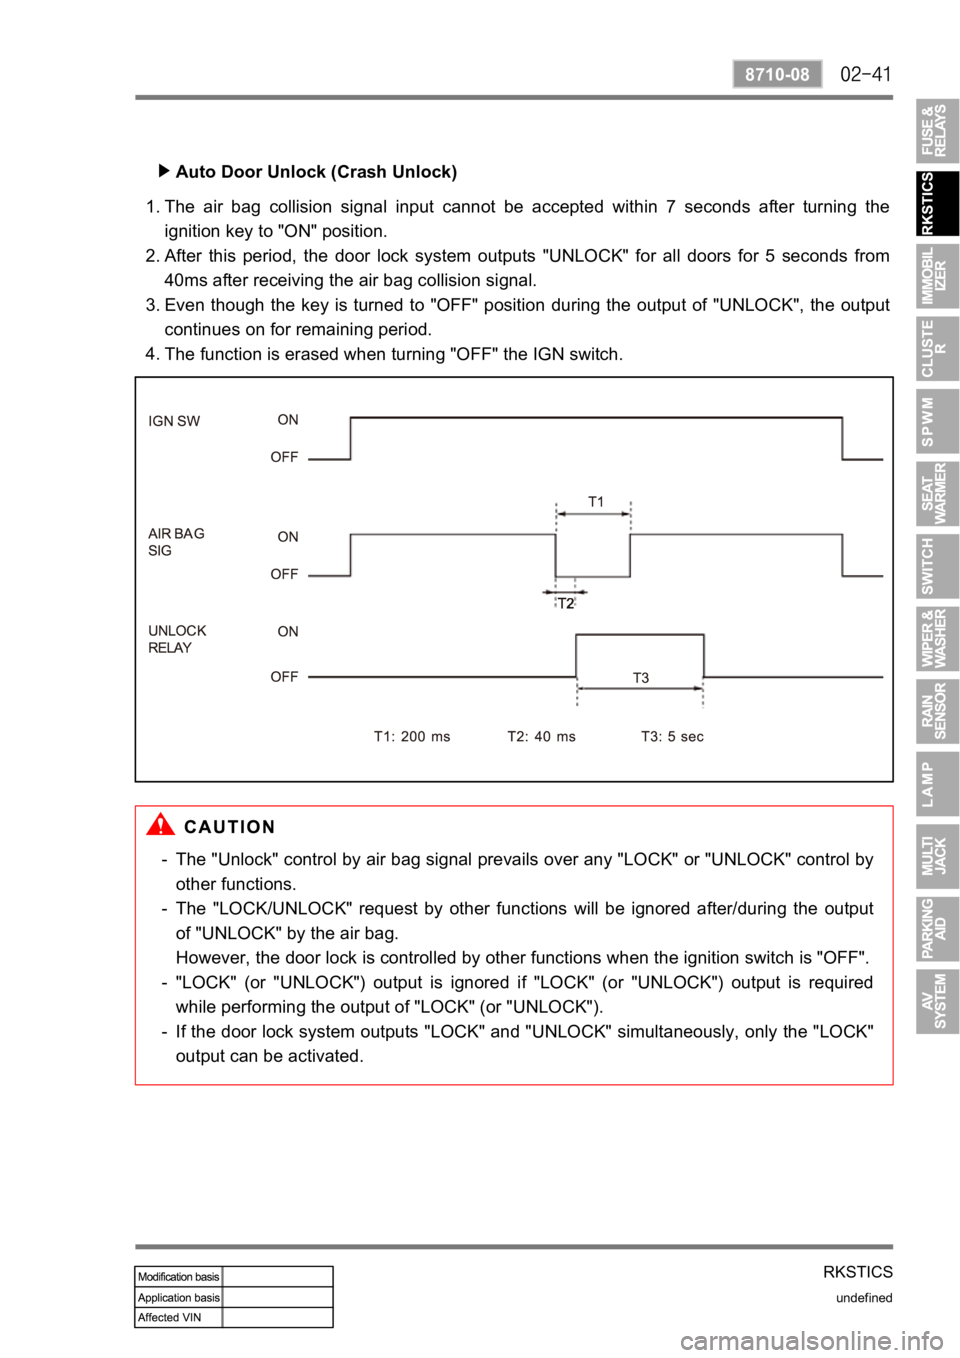 SSANGYONG REXTON 2006  Service Manual RKSTICS
undefined
8710-08
Auto Door Unlock (Crash Unlock)
The  air  bag  collision  signal  input  cannot  be  accepted  within  7 seconds  after  turning  the 
ignition key to "ON" position.
